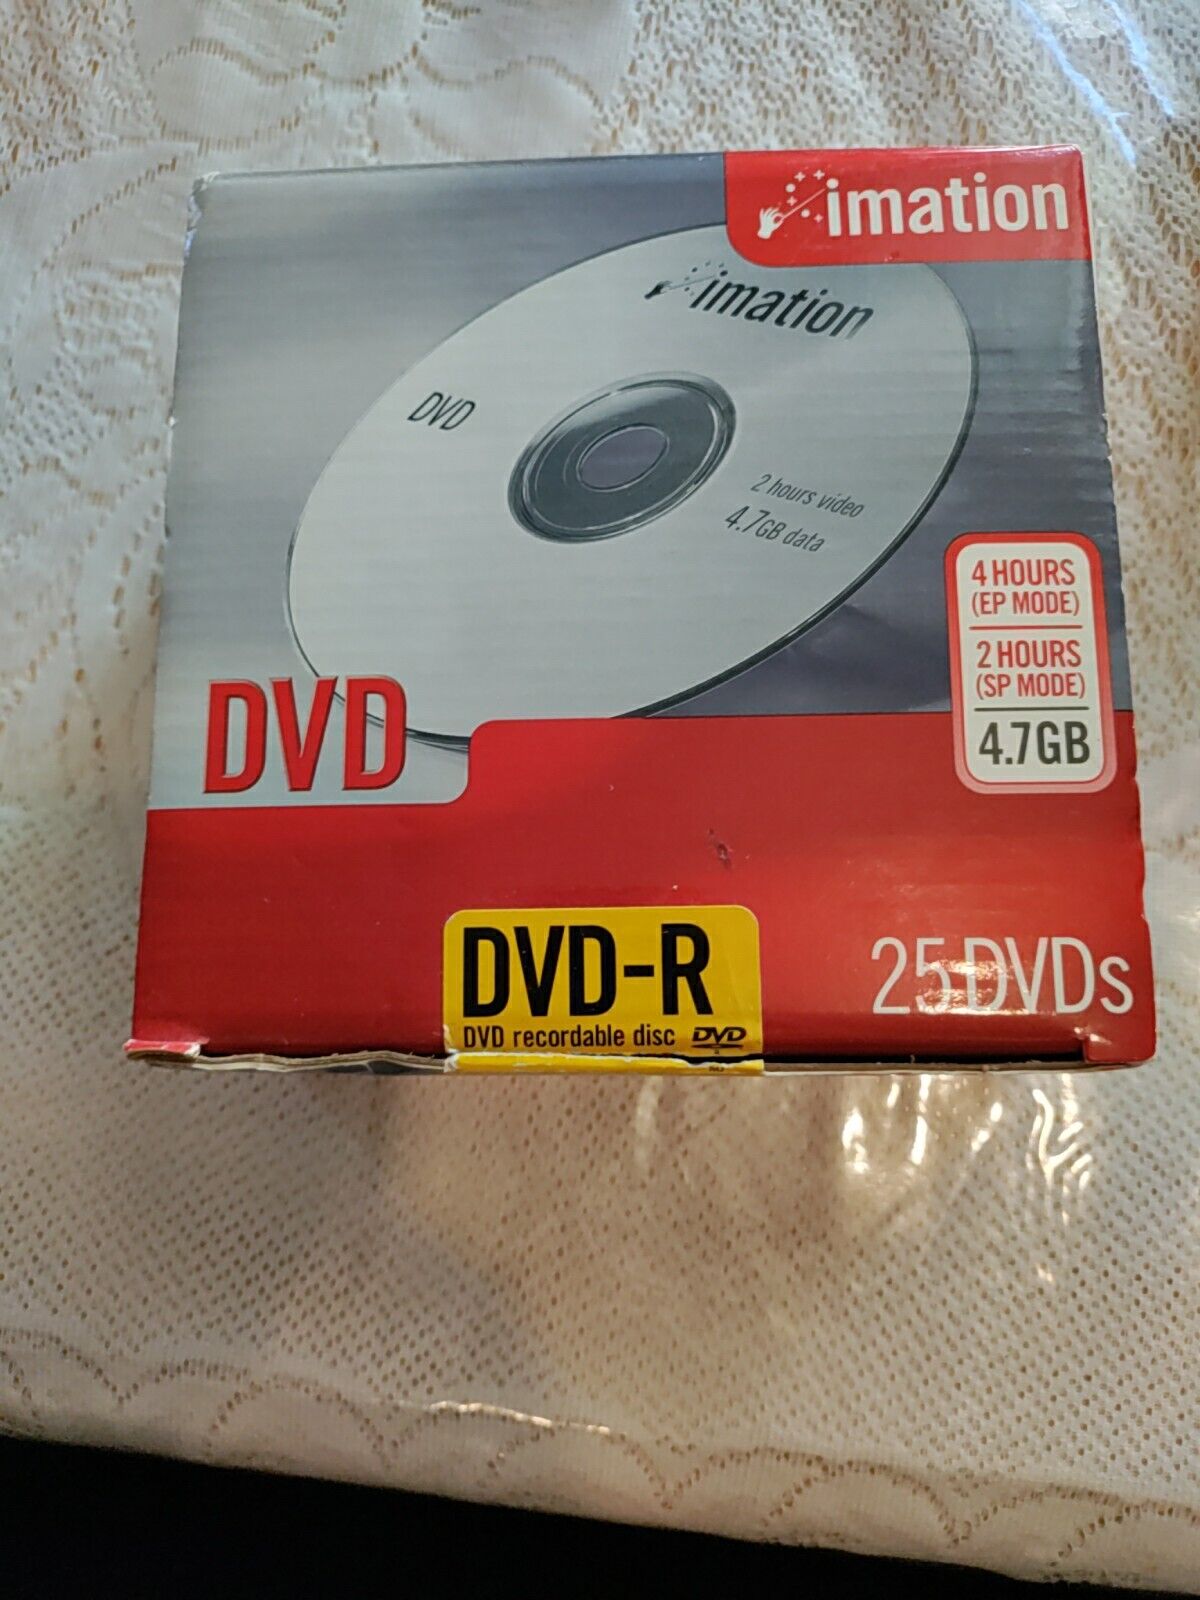 Imation DVD-R 25 DVDs 4.7 GB Recordable Disc  